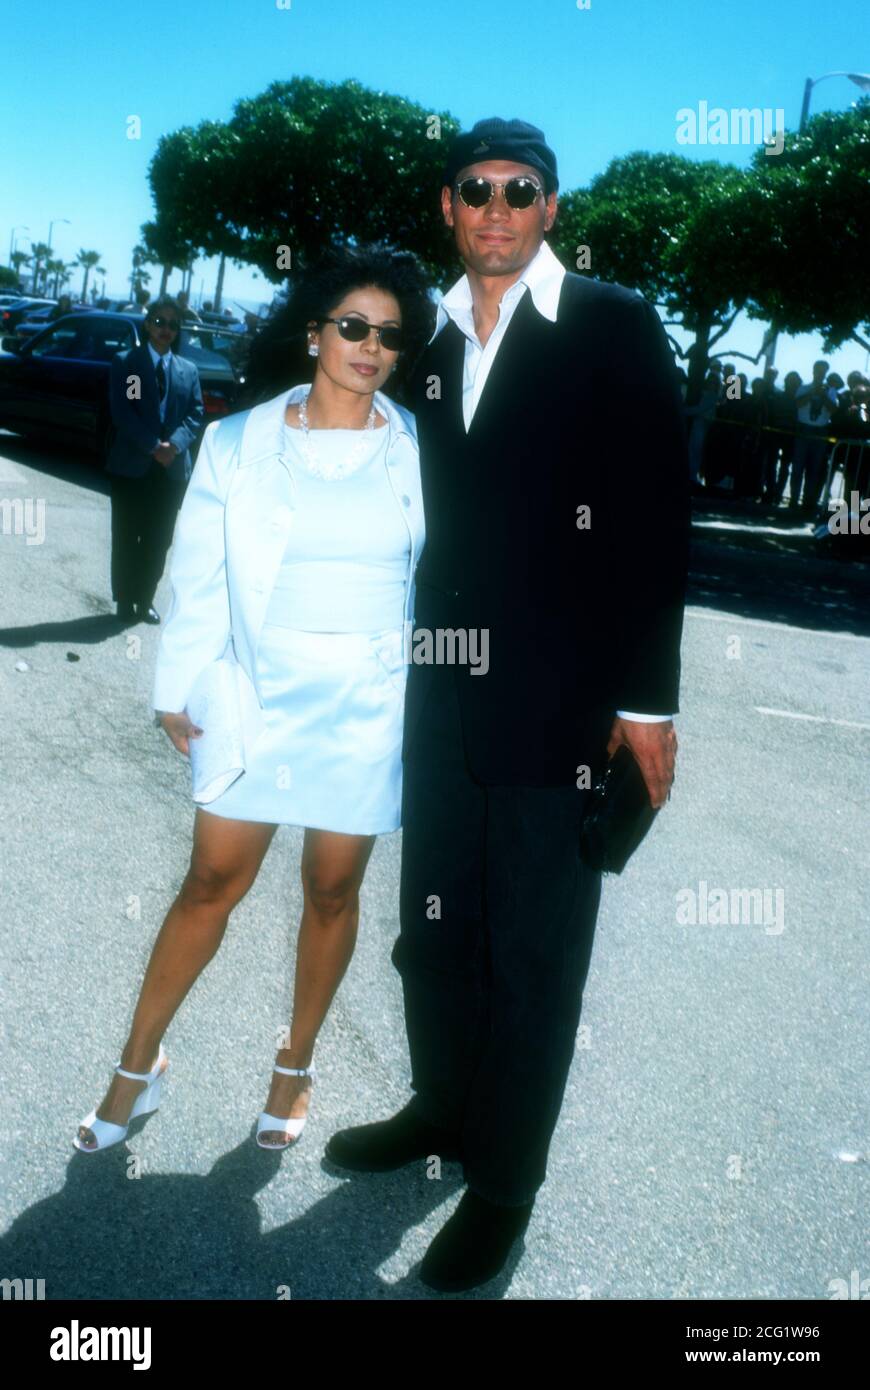 Santa Monica, California, USA 23rd March 1996 Actor Jimmy Smits and Wanda De Jesus attend the 11th Annual IFP/West Independent Spirit Awards on March 23, 1996 at Santa Monica Beach in Santa Monica, California, USA. Photo by Barry King/Alamy Stock Photo Stock Photo